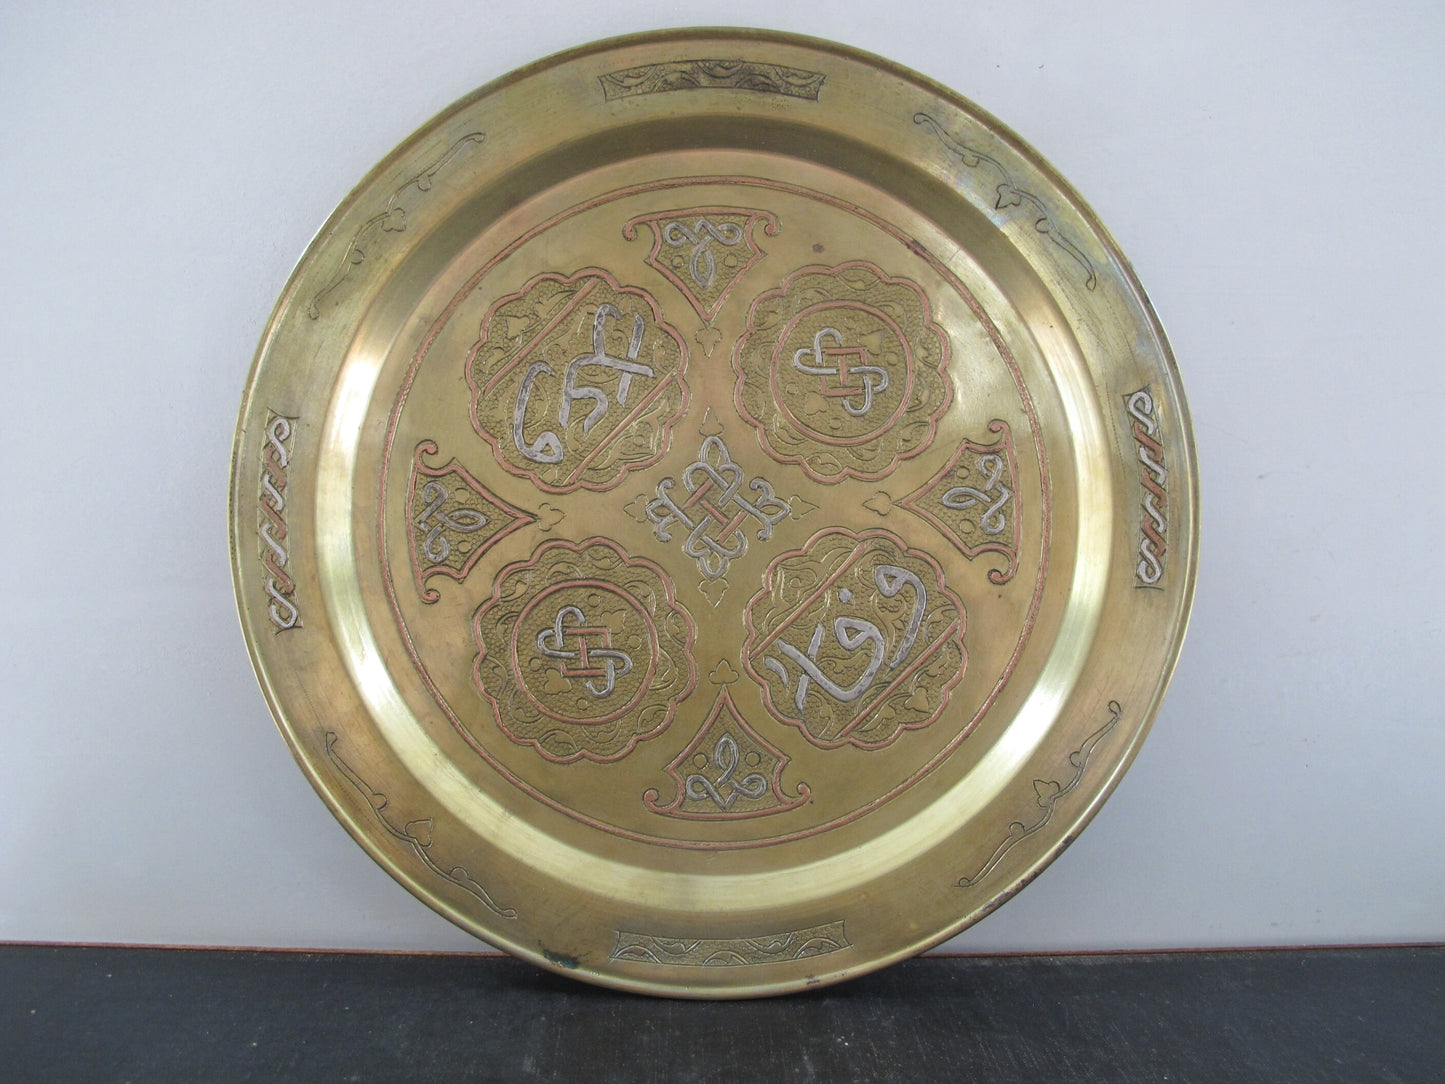 Platter Mixed Metals Middle Eastern Arabic Islamic Art Brass Copper Silver Alloy 1920s